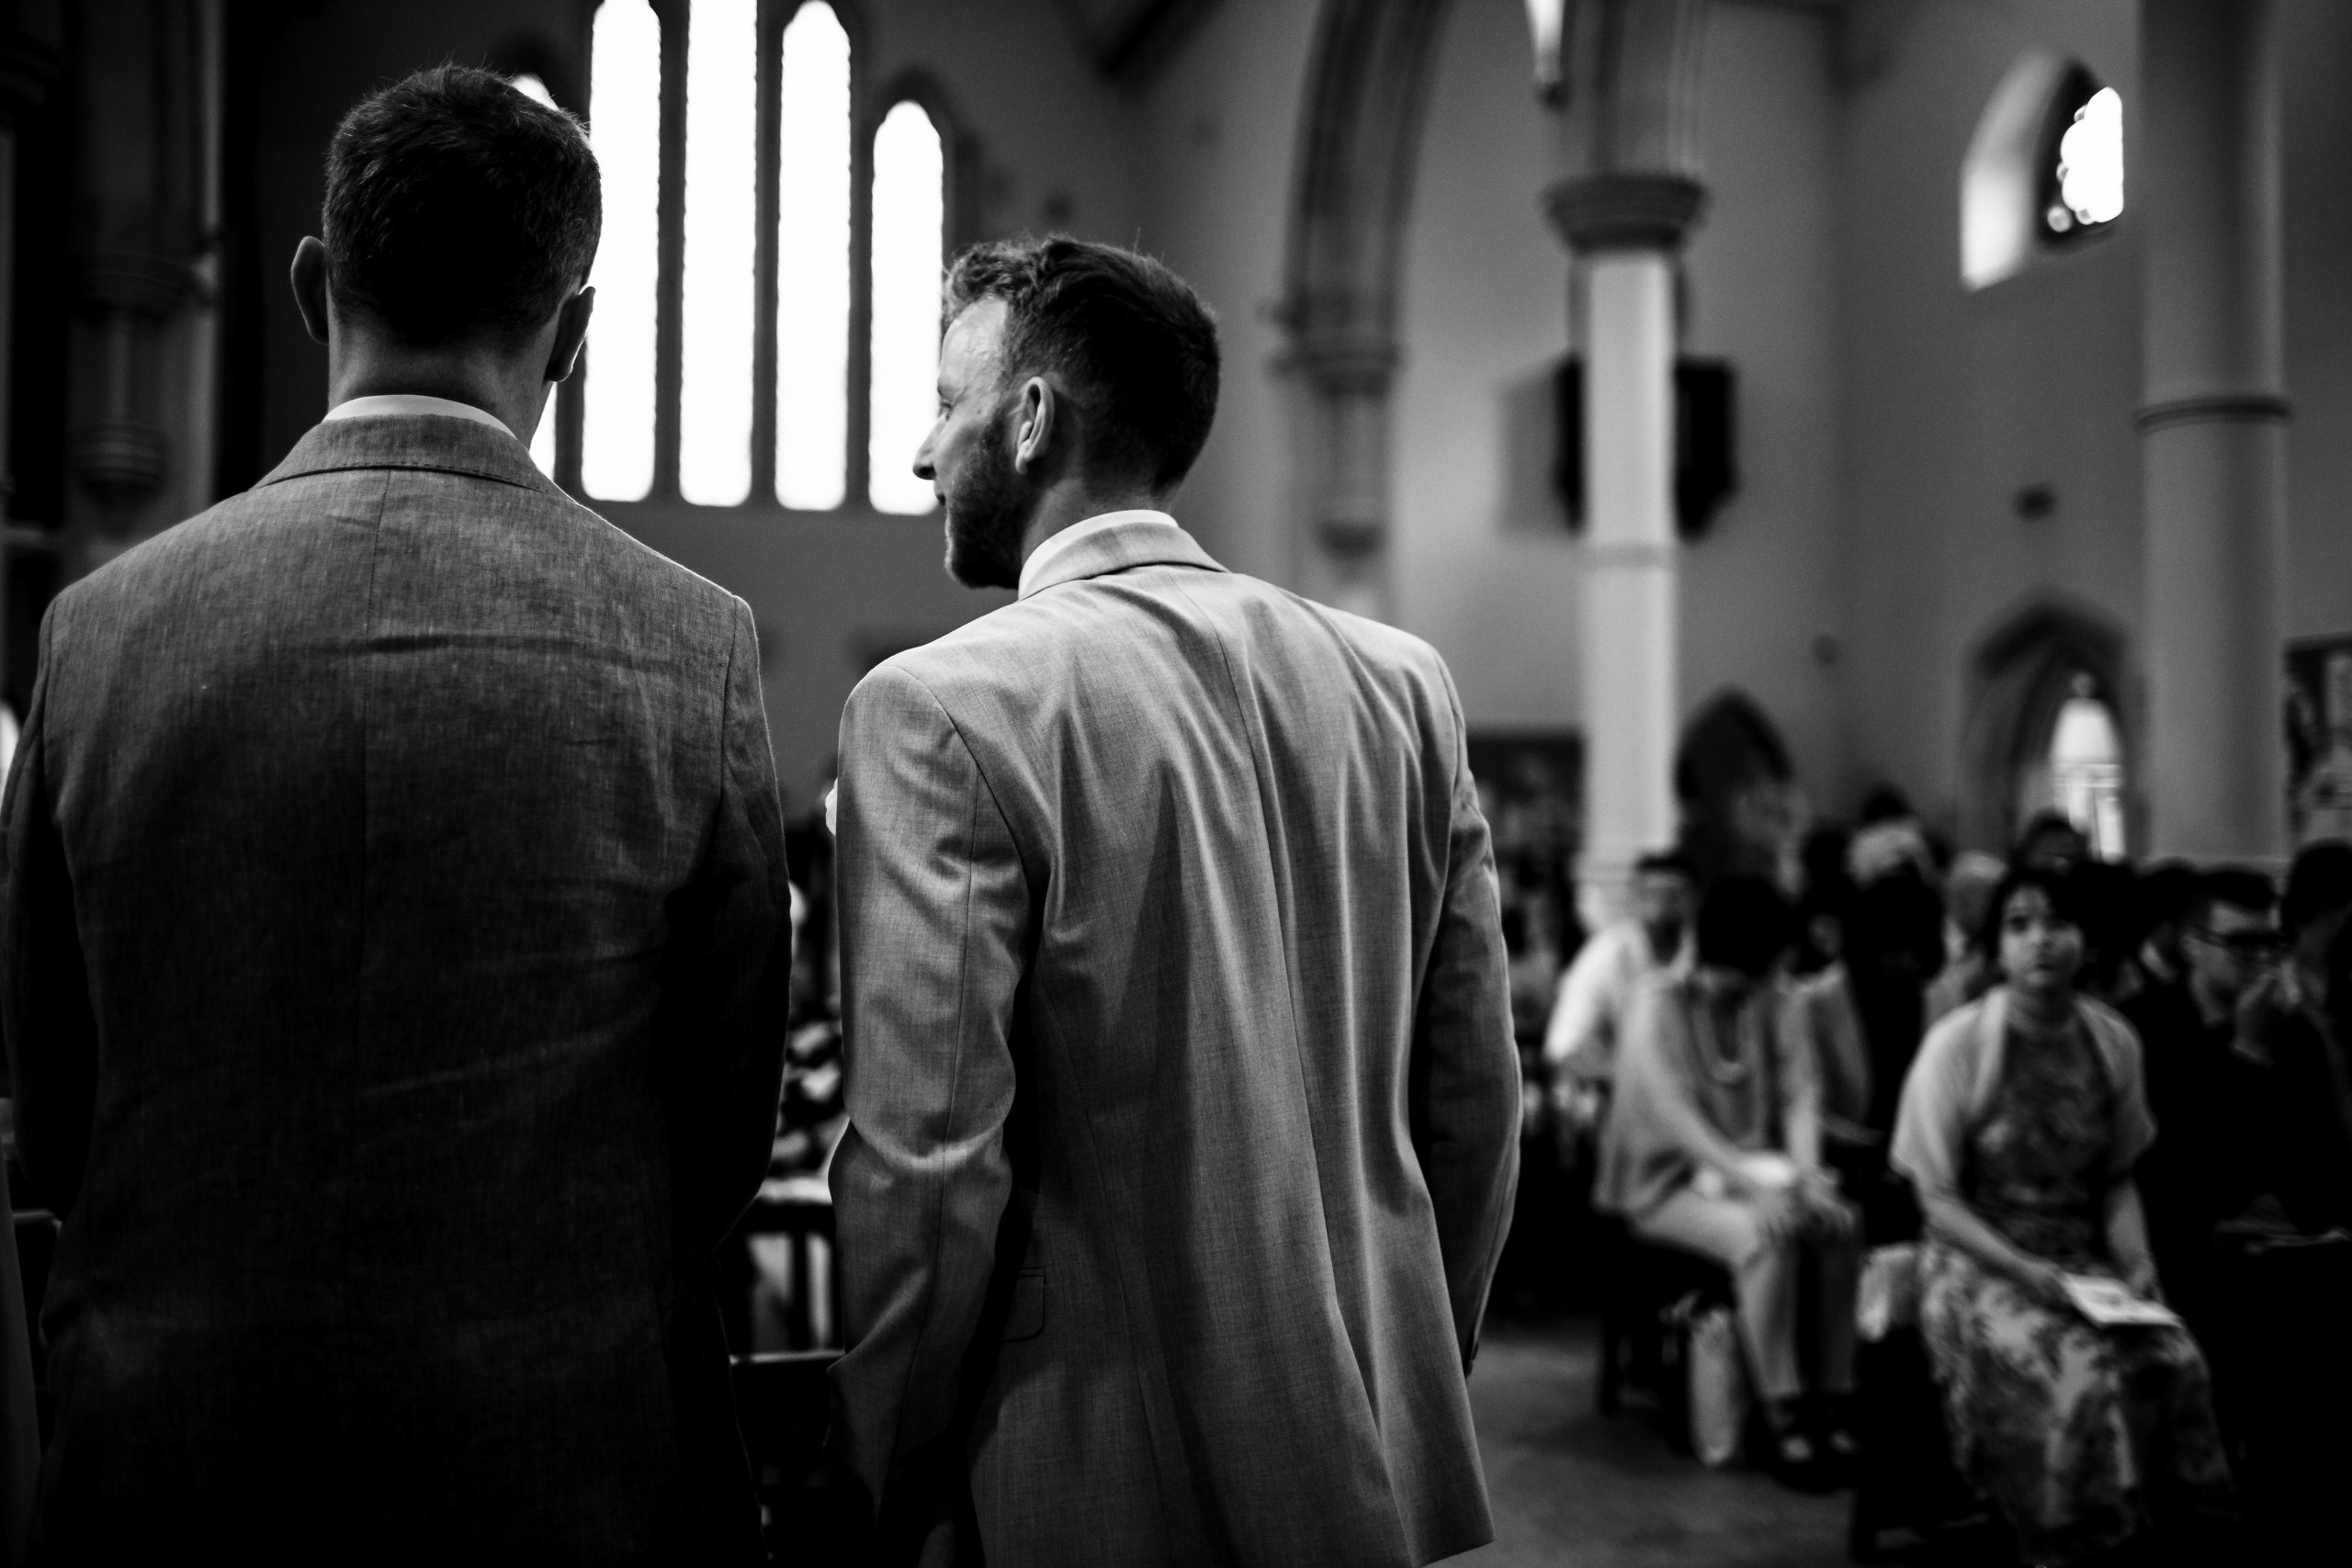 Groom standing next to his best man in church